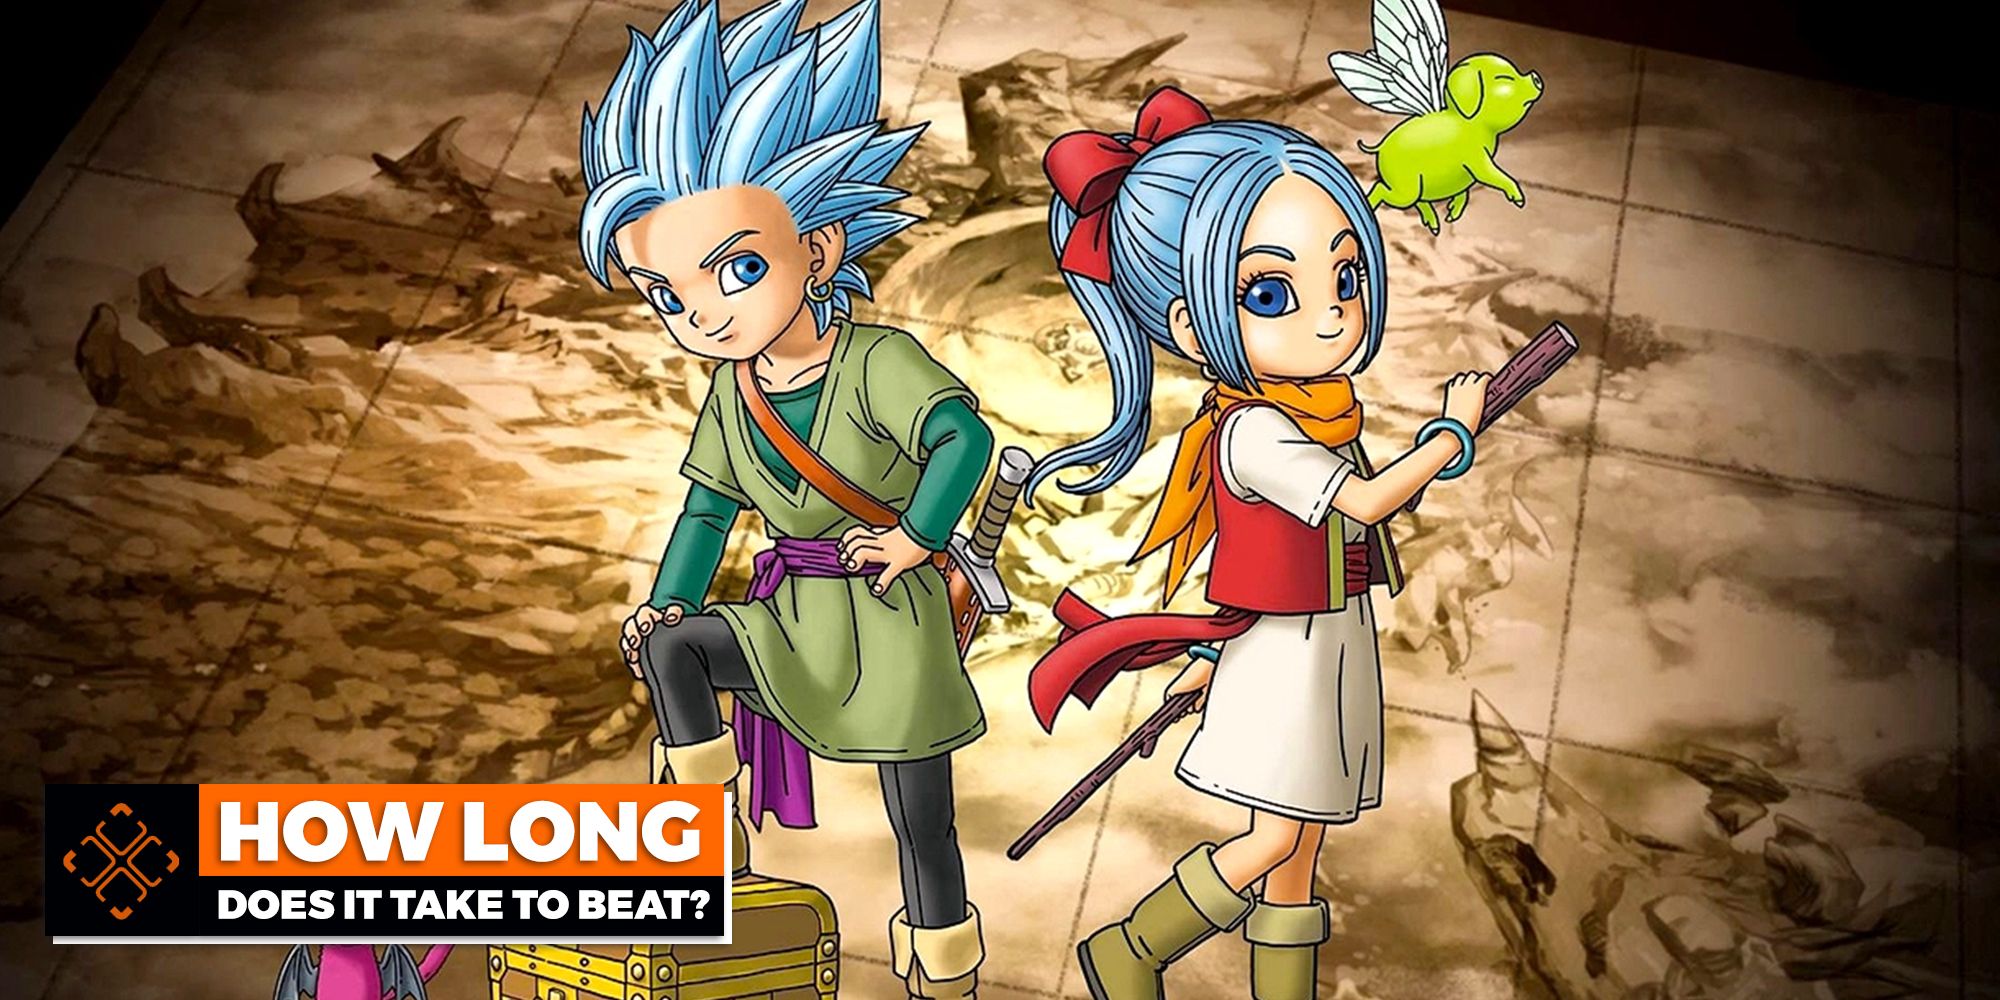 Game art from Dragon Quest Treasures.